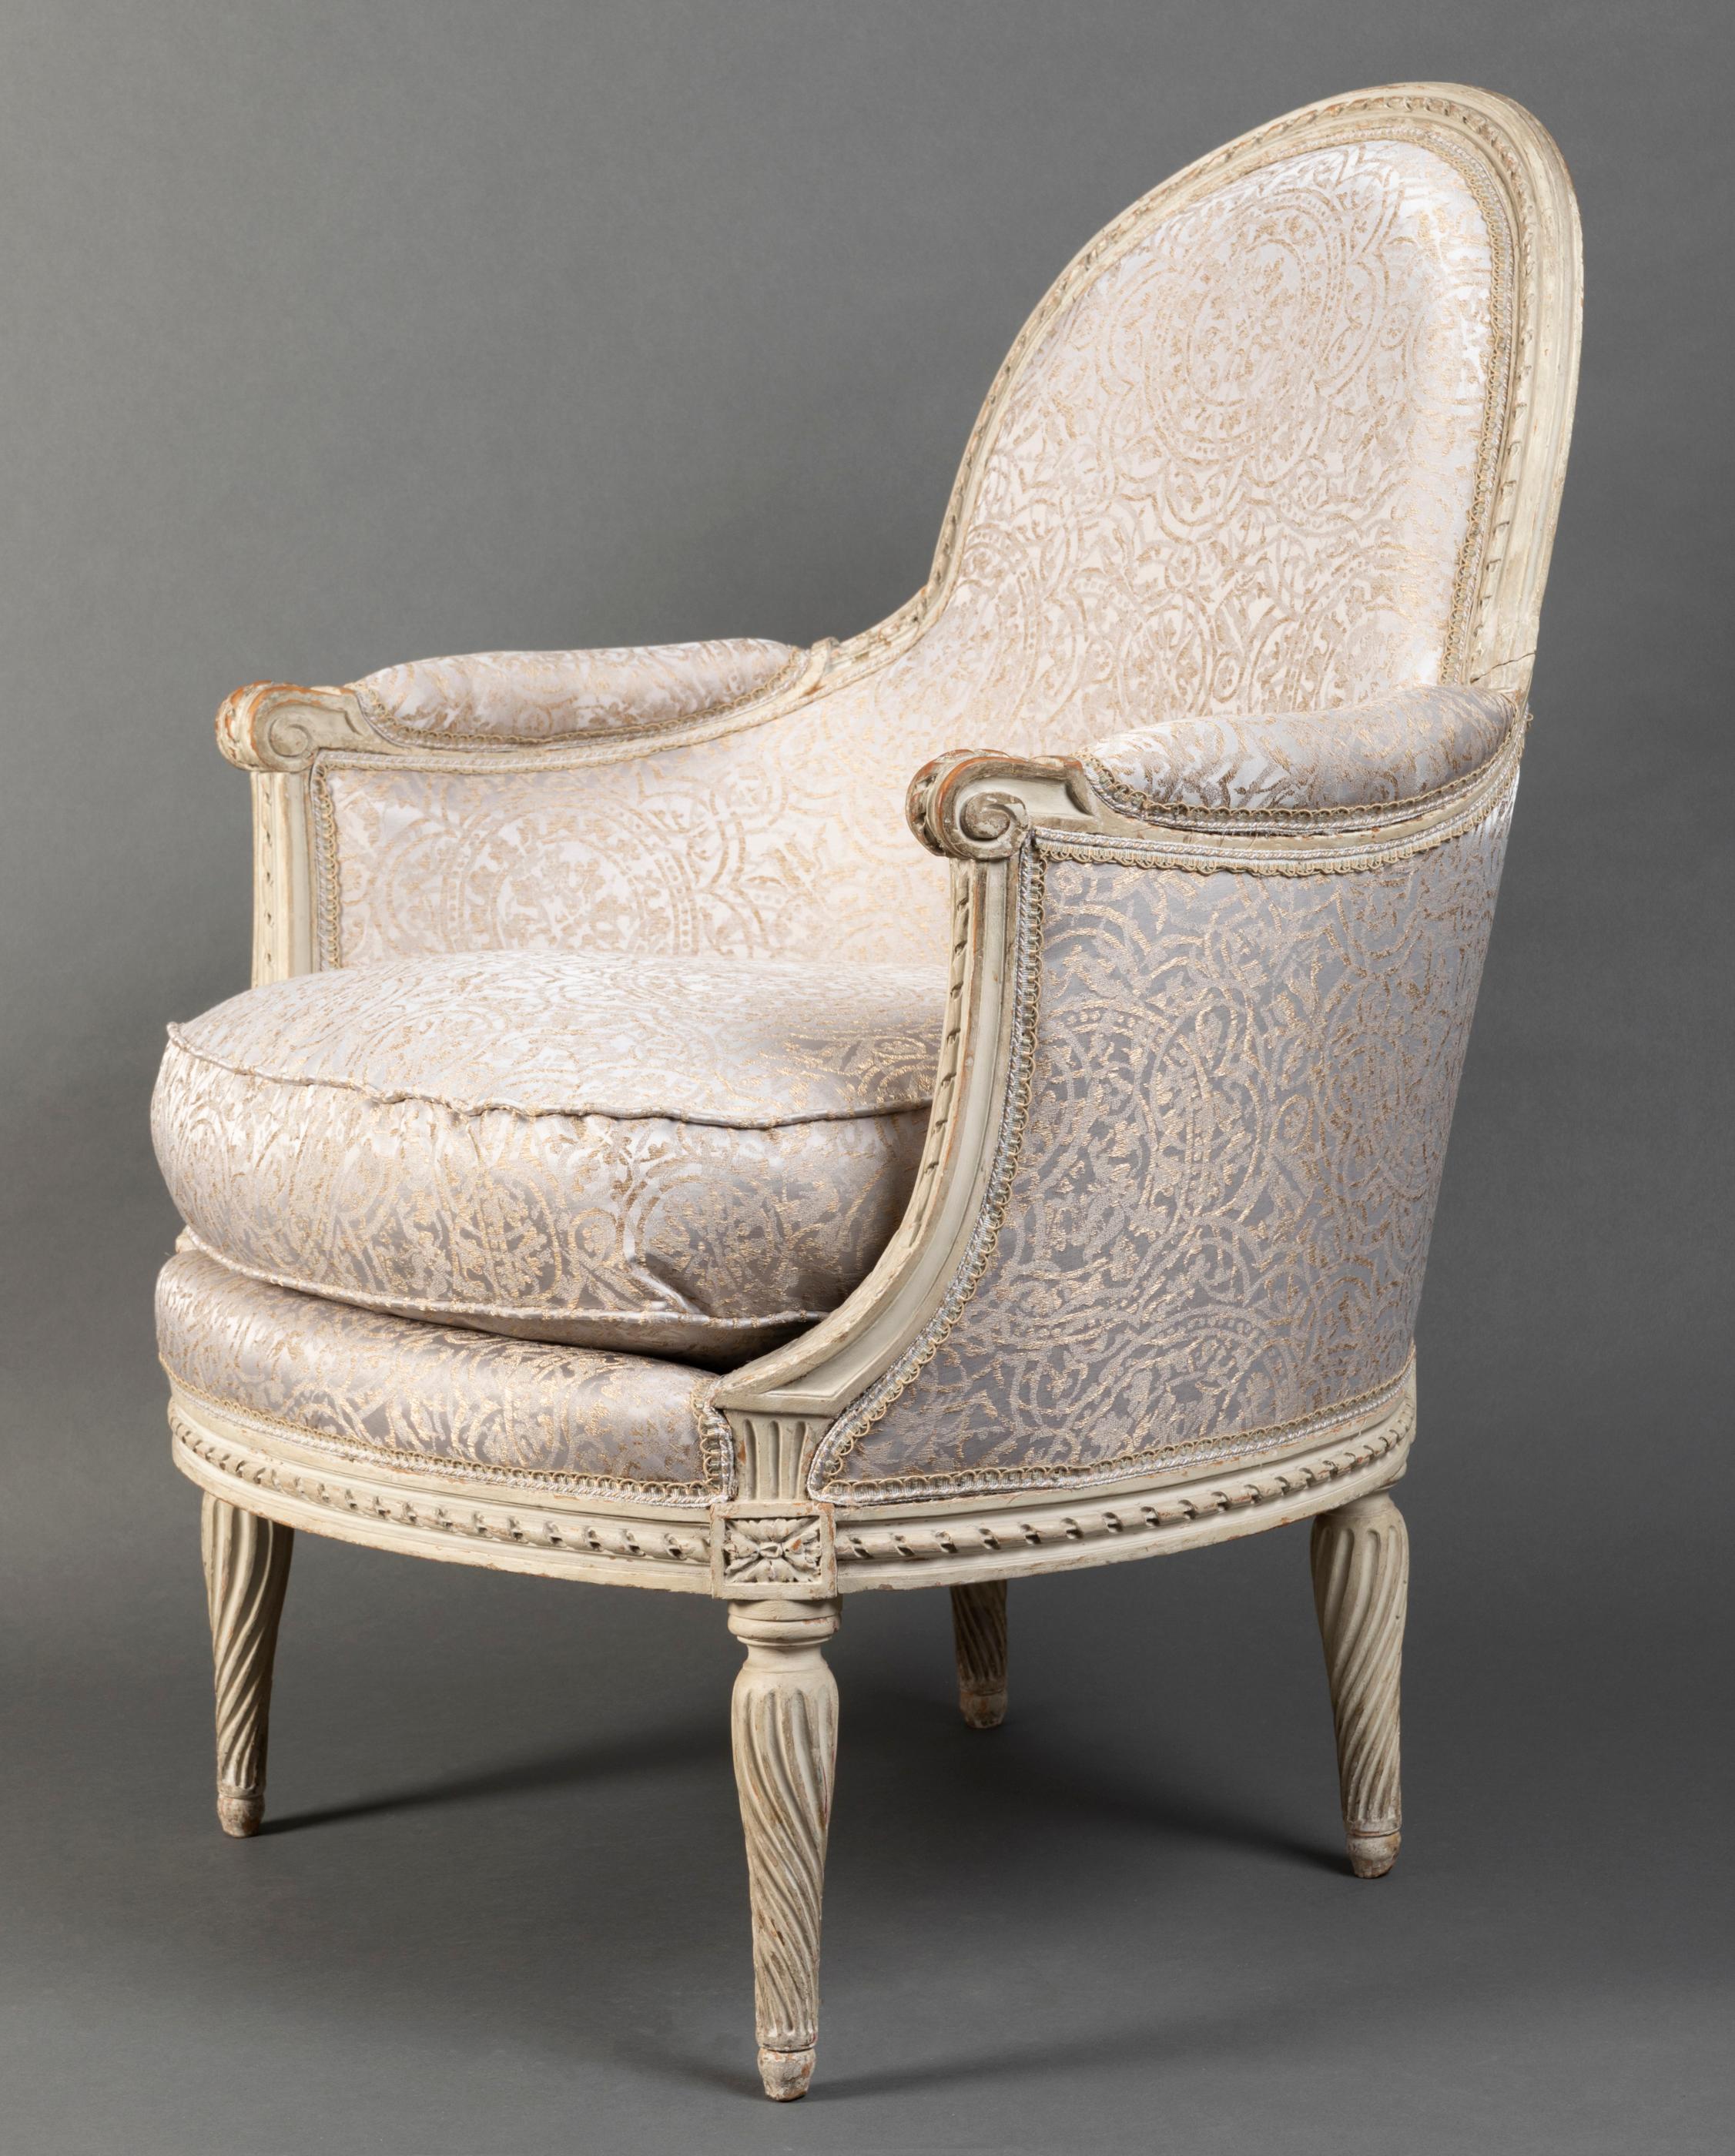 Pair of Bergère Chairs from the Louis XVI Period Stamped, Delanois, 18th Century For Sale 11